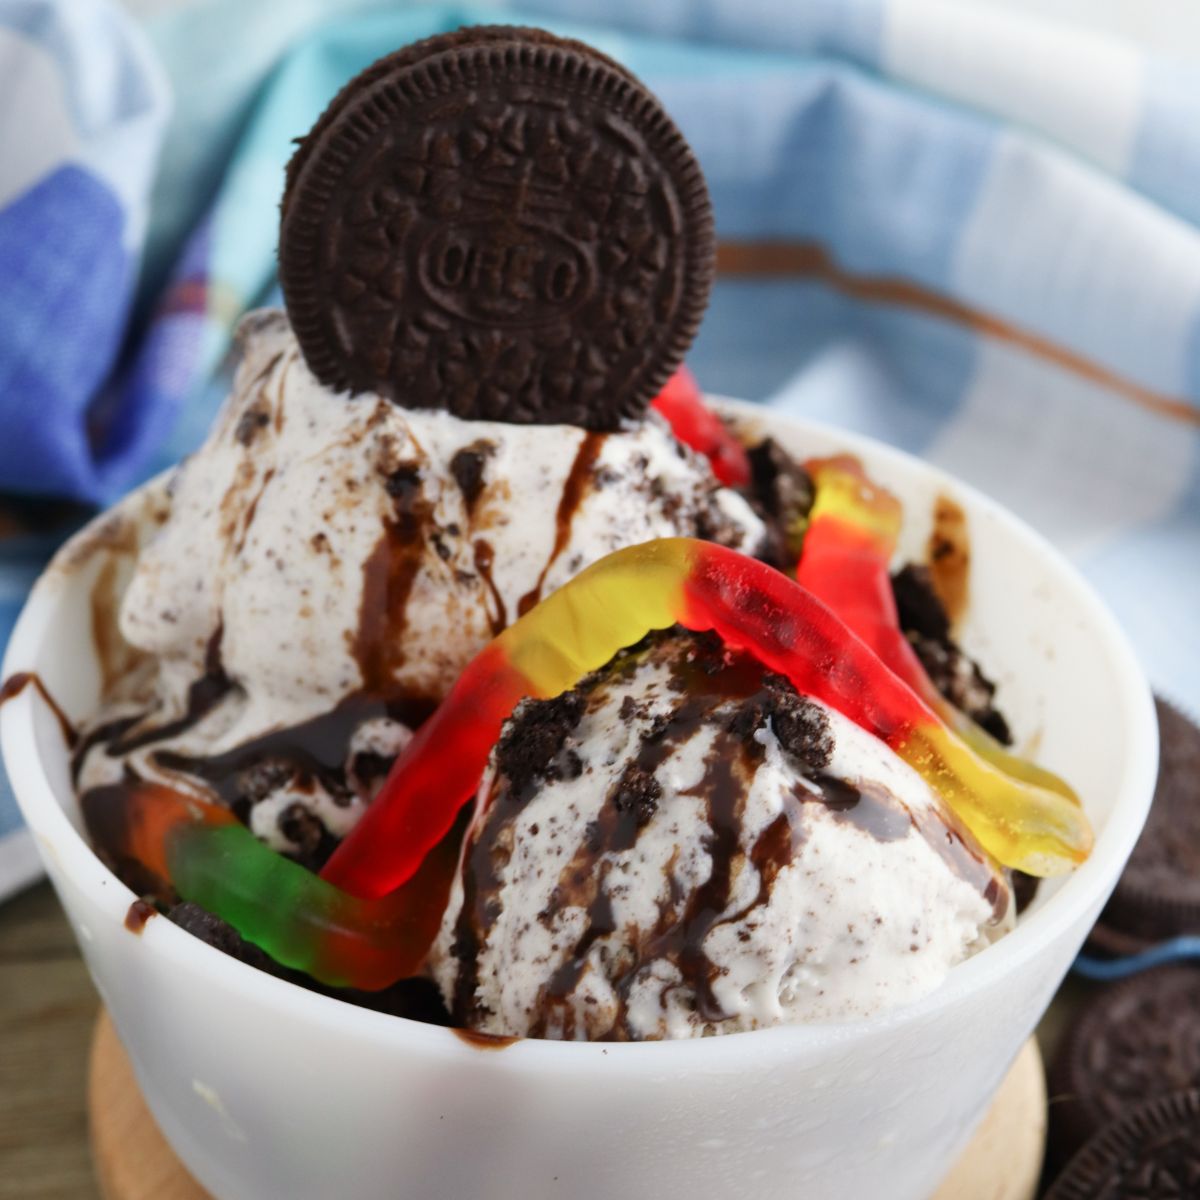 Oreo ice cream in a bowl with gummy bears.